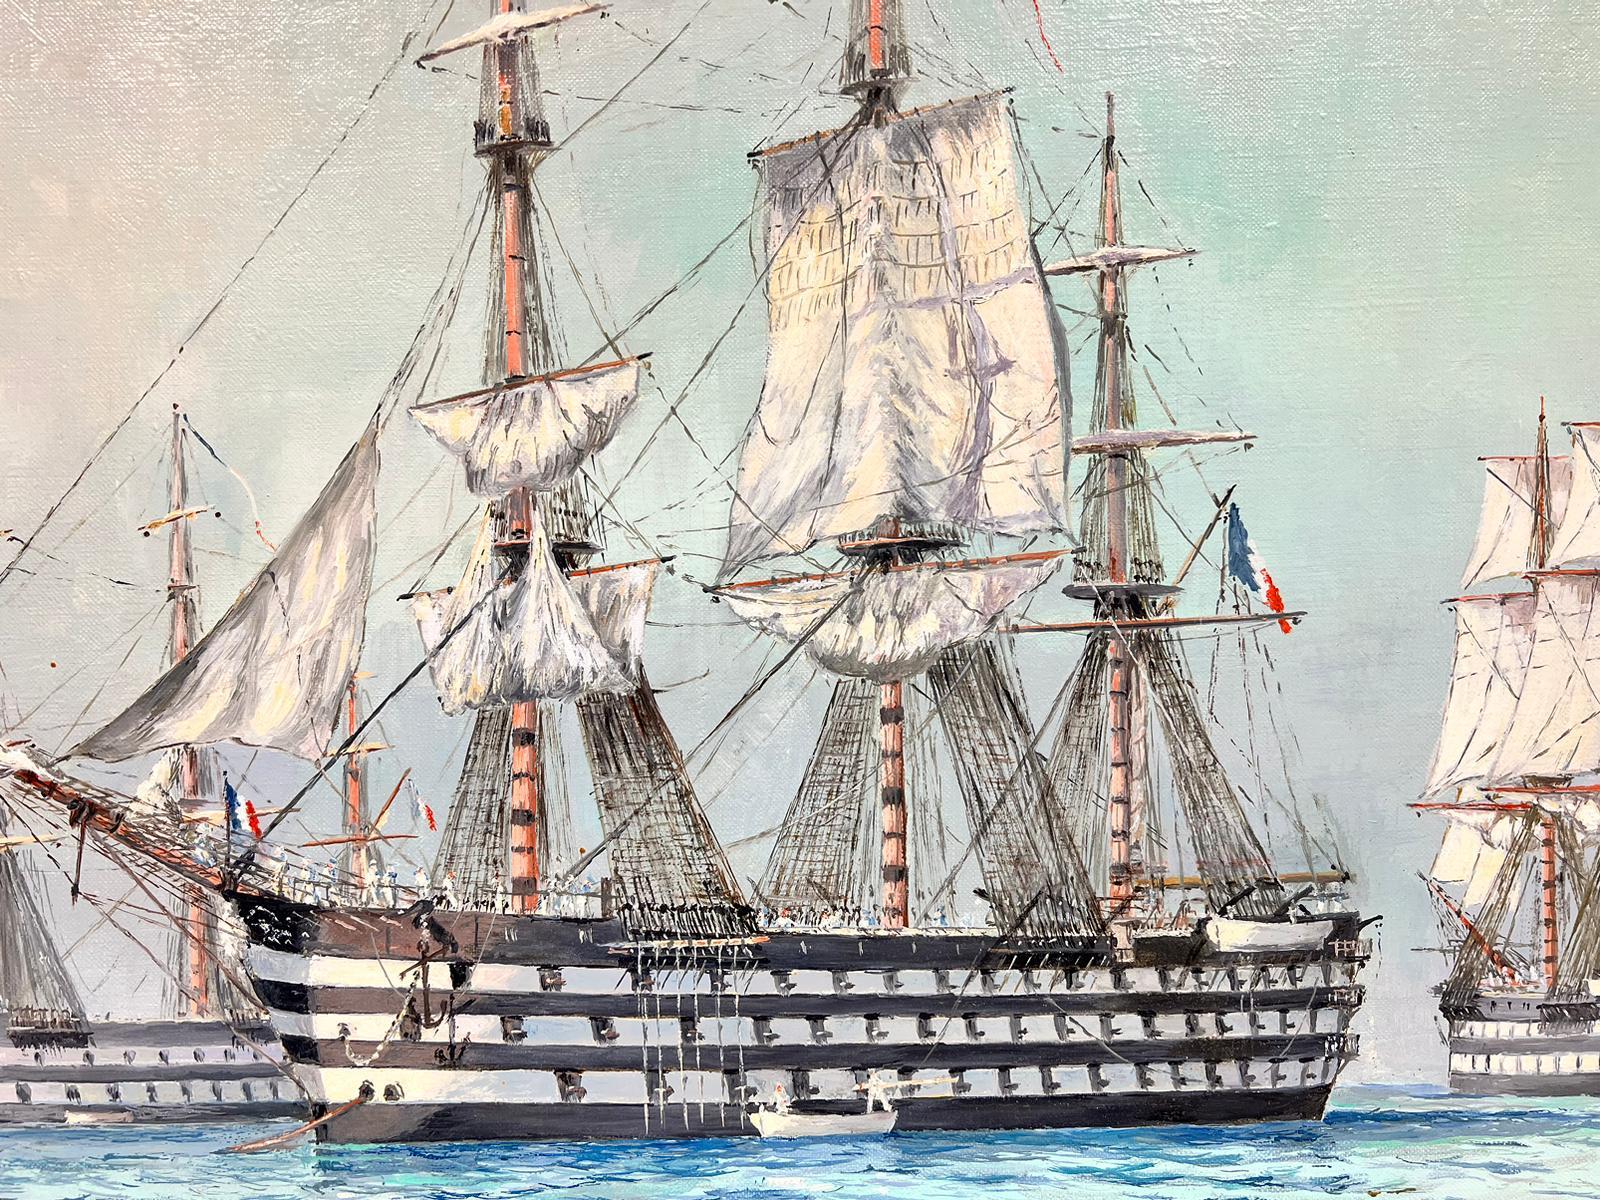 Artist/ School: French School, 20th century, signed by Eug. Mavie

Title: Napoleonic War Ships at Sea, beautifully detailed with remarkable detailing. 

Medium: oil on canvas, unframed

Size: 20 x 25.5 inches

Colors: Blue, white and